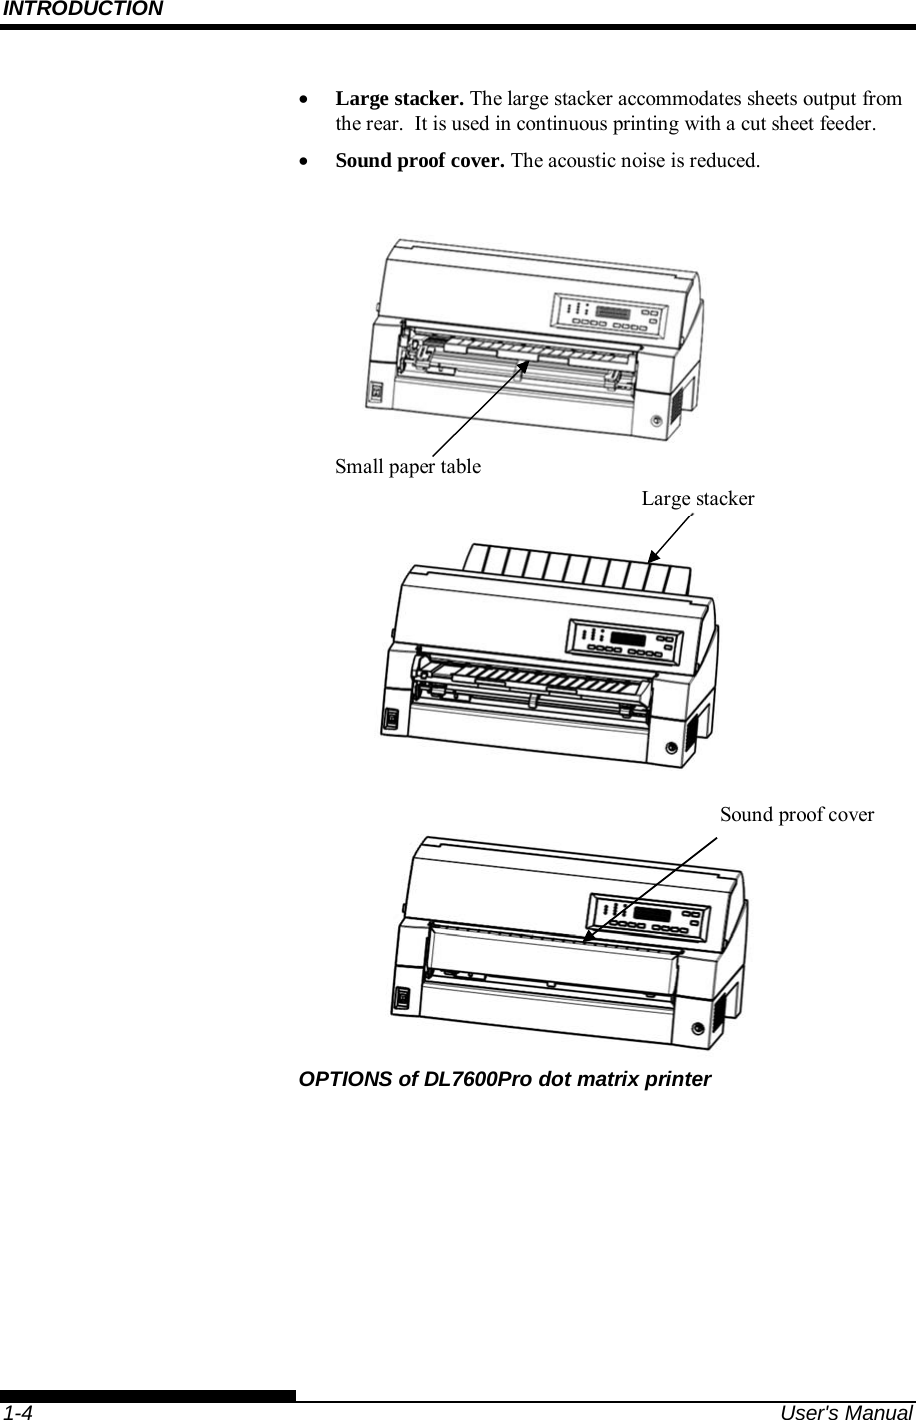 INTRODUCTION    1-4  User&apos;s Manual  Large stacker. The large stacker accommodates sheets output from the rear.  It is used in continuous printing with a cut sheet feeder.  Sound proof cover. The acoustic noise is reduced.                               OPTIONS of DL7600Pro dot matrix printer Large stacker Sound proof cover Small paper table 